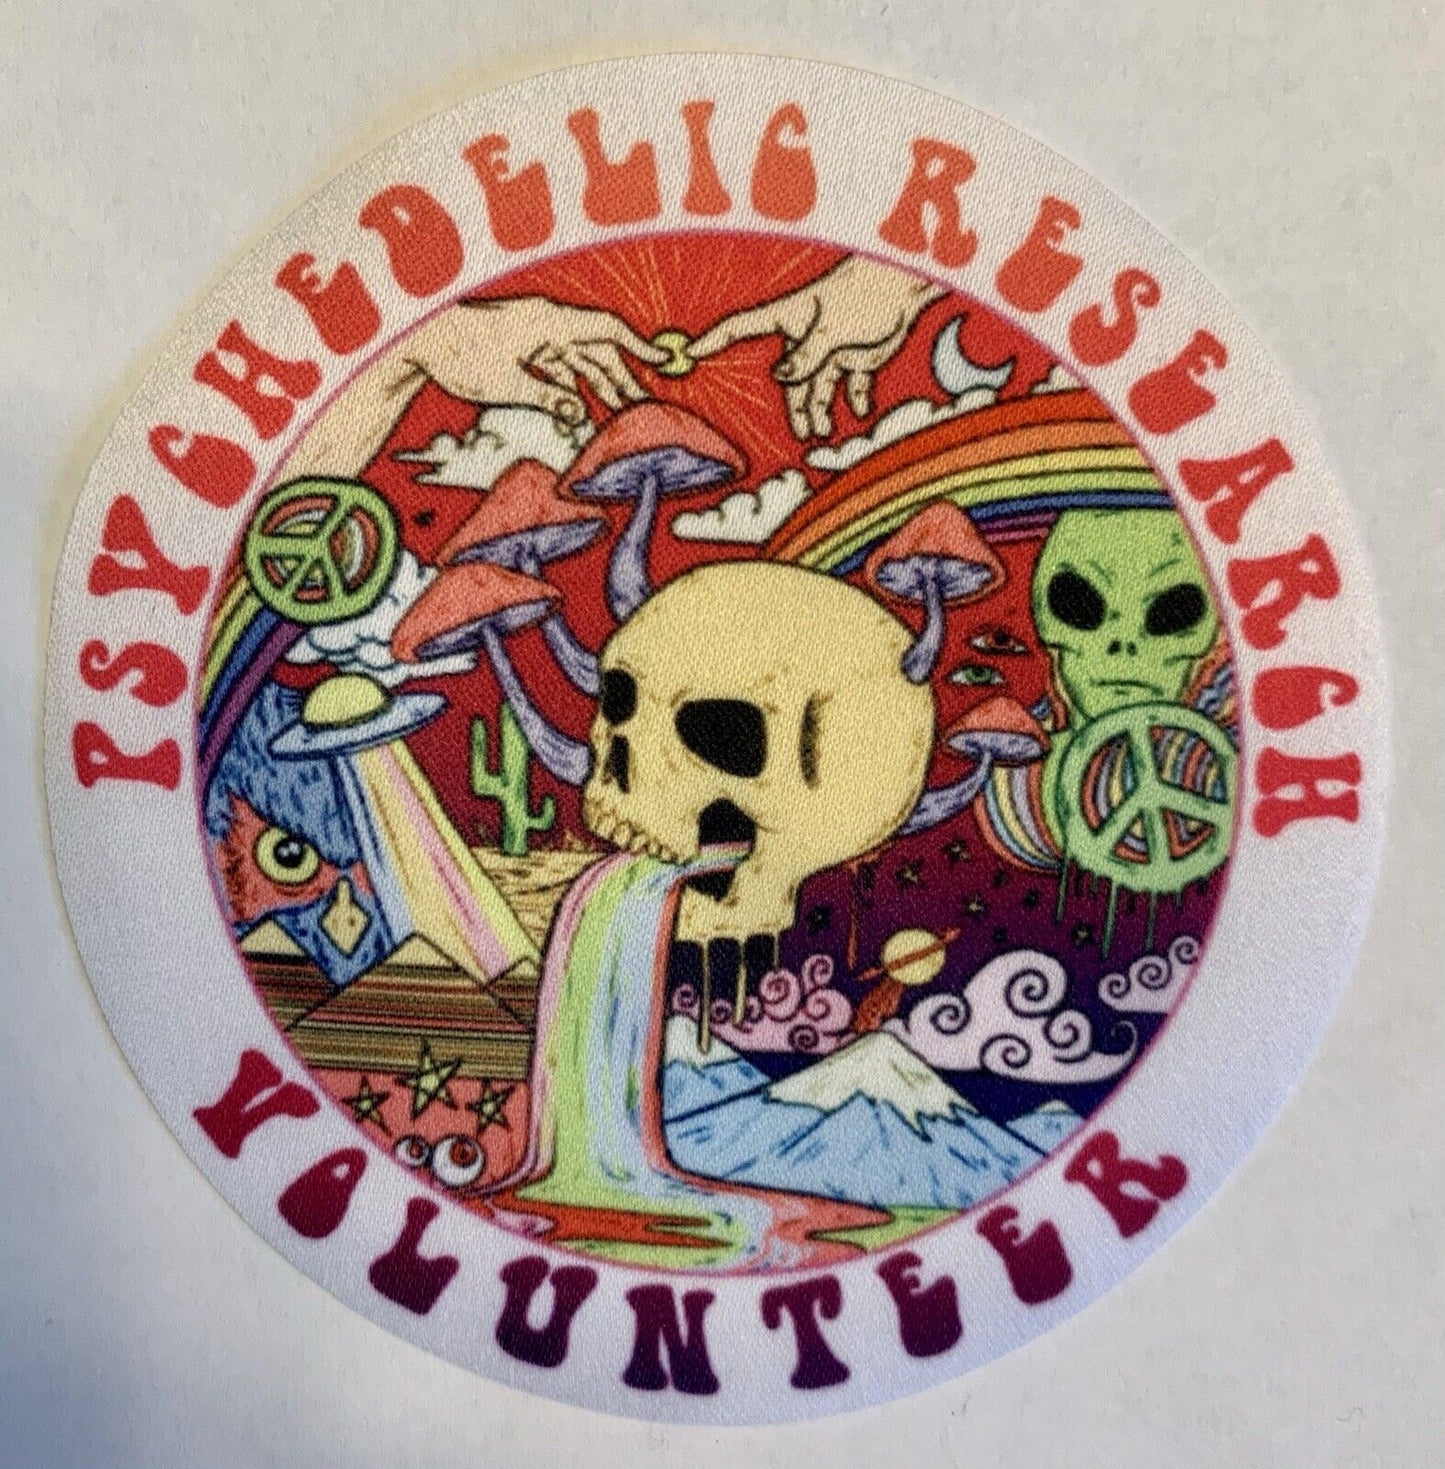 70Psychedelic Researcher Volunteer Iron-On Sticker Patch